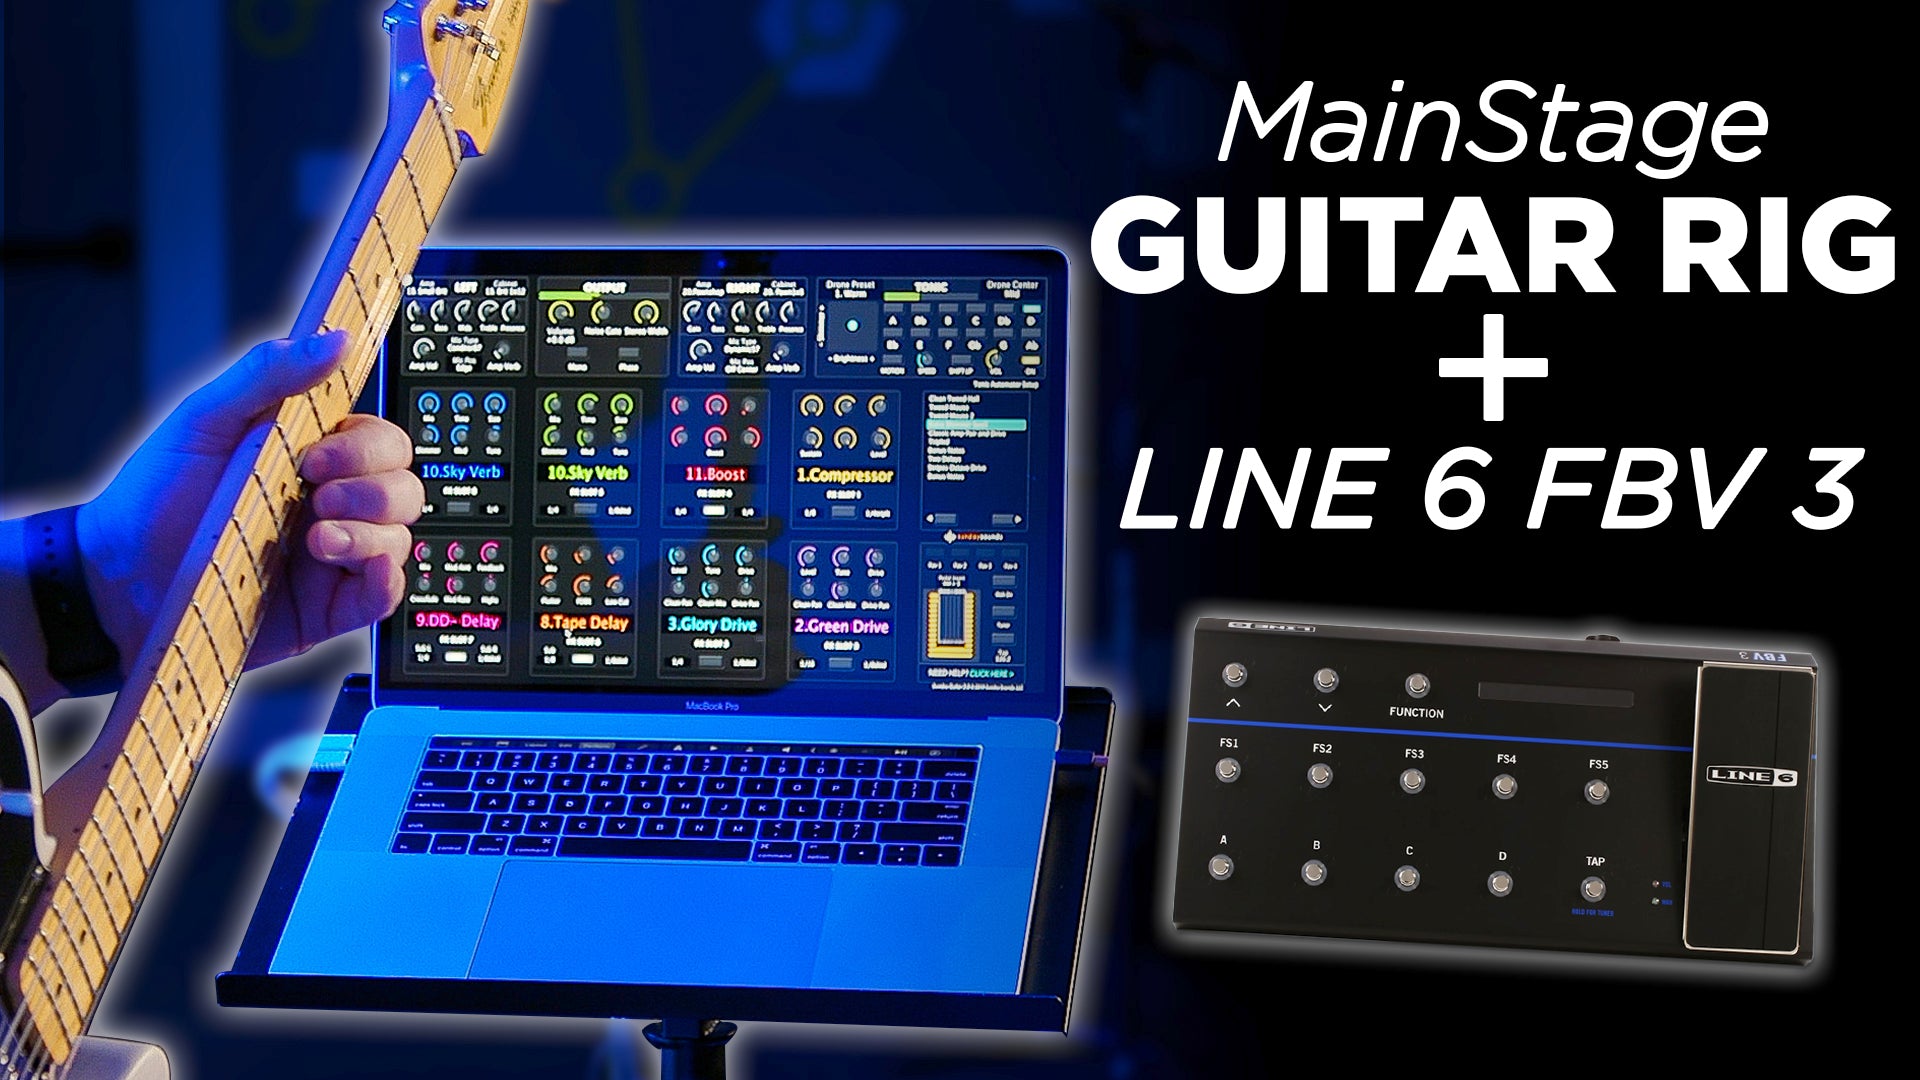 MainStage Guitar Rig with the Line 6 FBV3 Foot Controller!